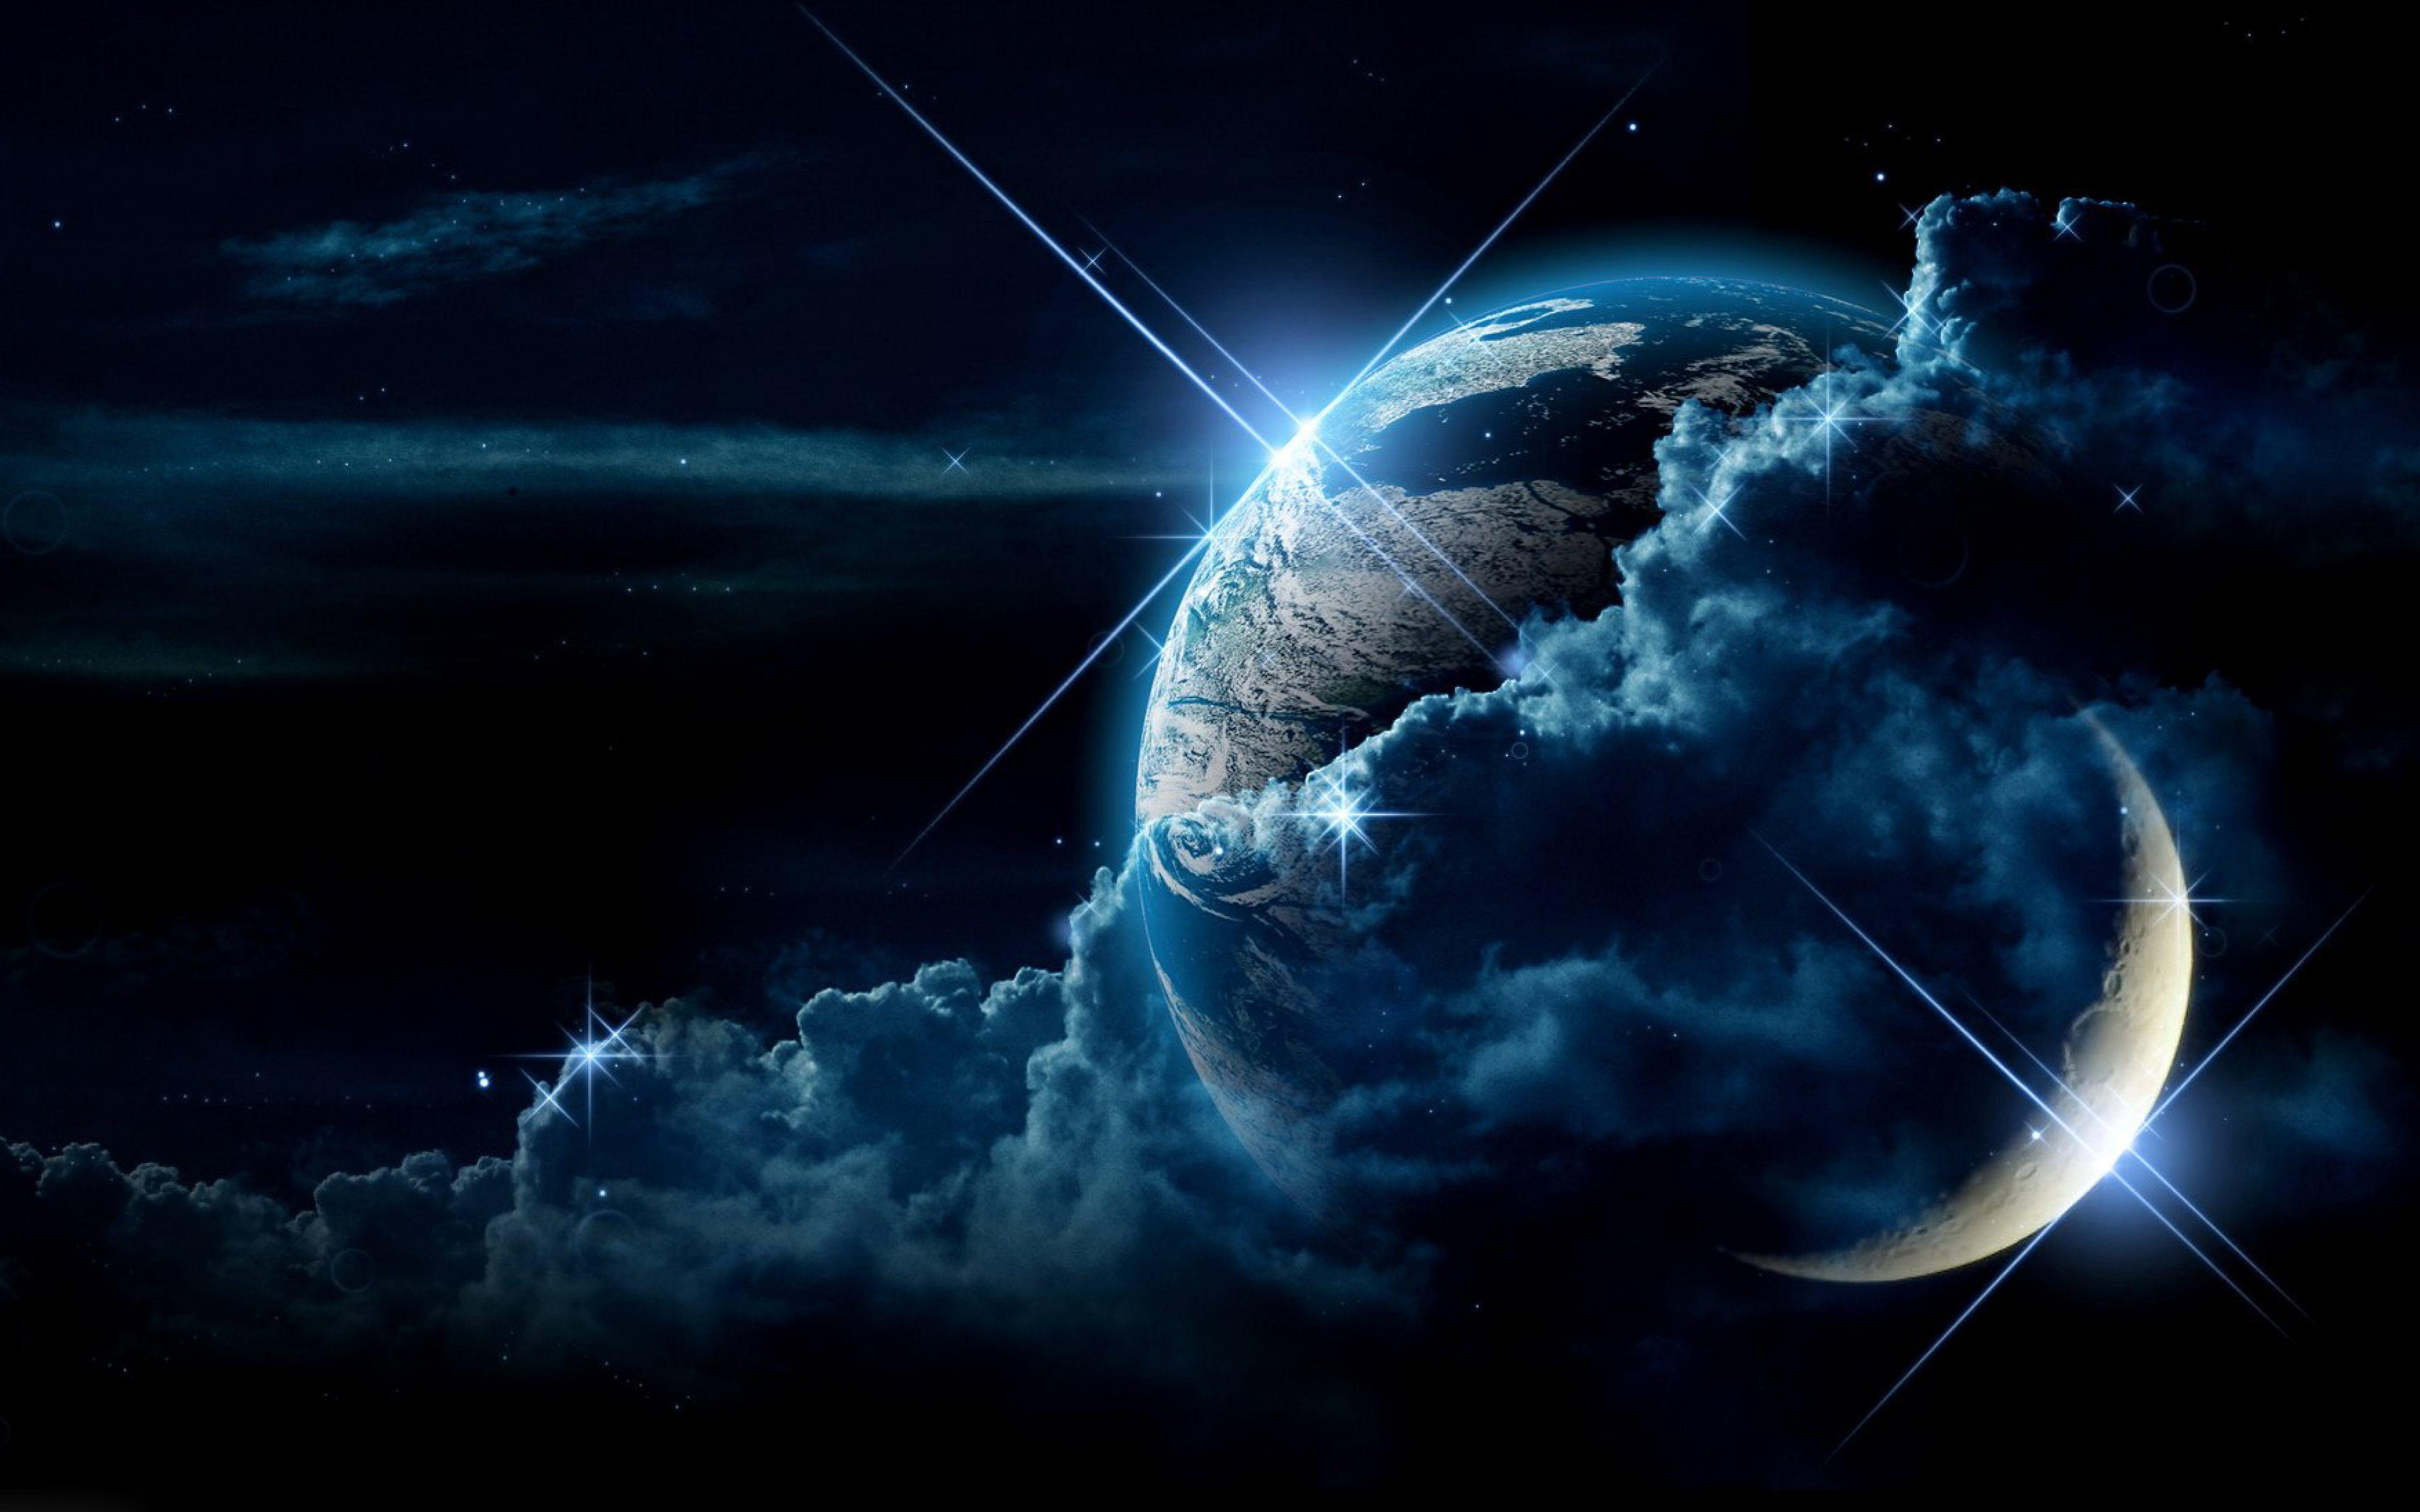 Earth and Moon in Space Wallpaper Download 4K Resolution. Cool background pics, Cool background, Night sky tattoos